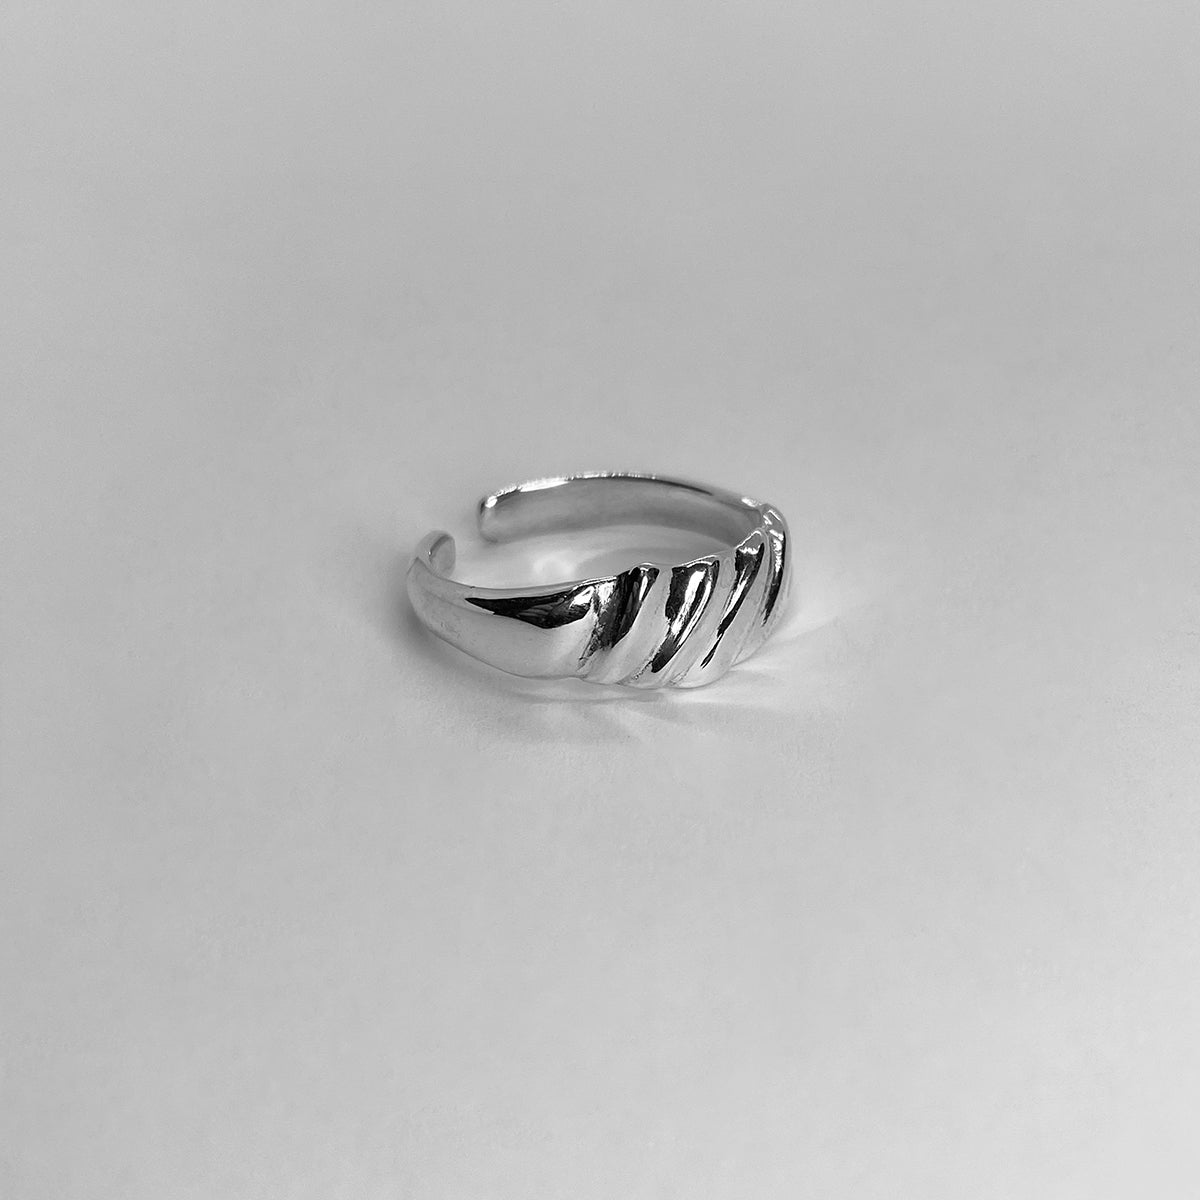 The Parz ring is a handmade piece made of 925 sterling silver. It is thin and features diagonal lines, creating a sleek and glossy appearance